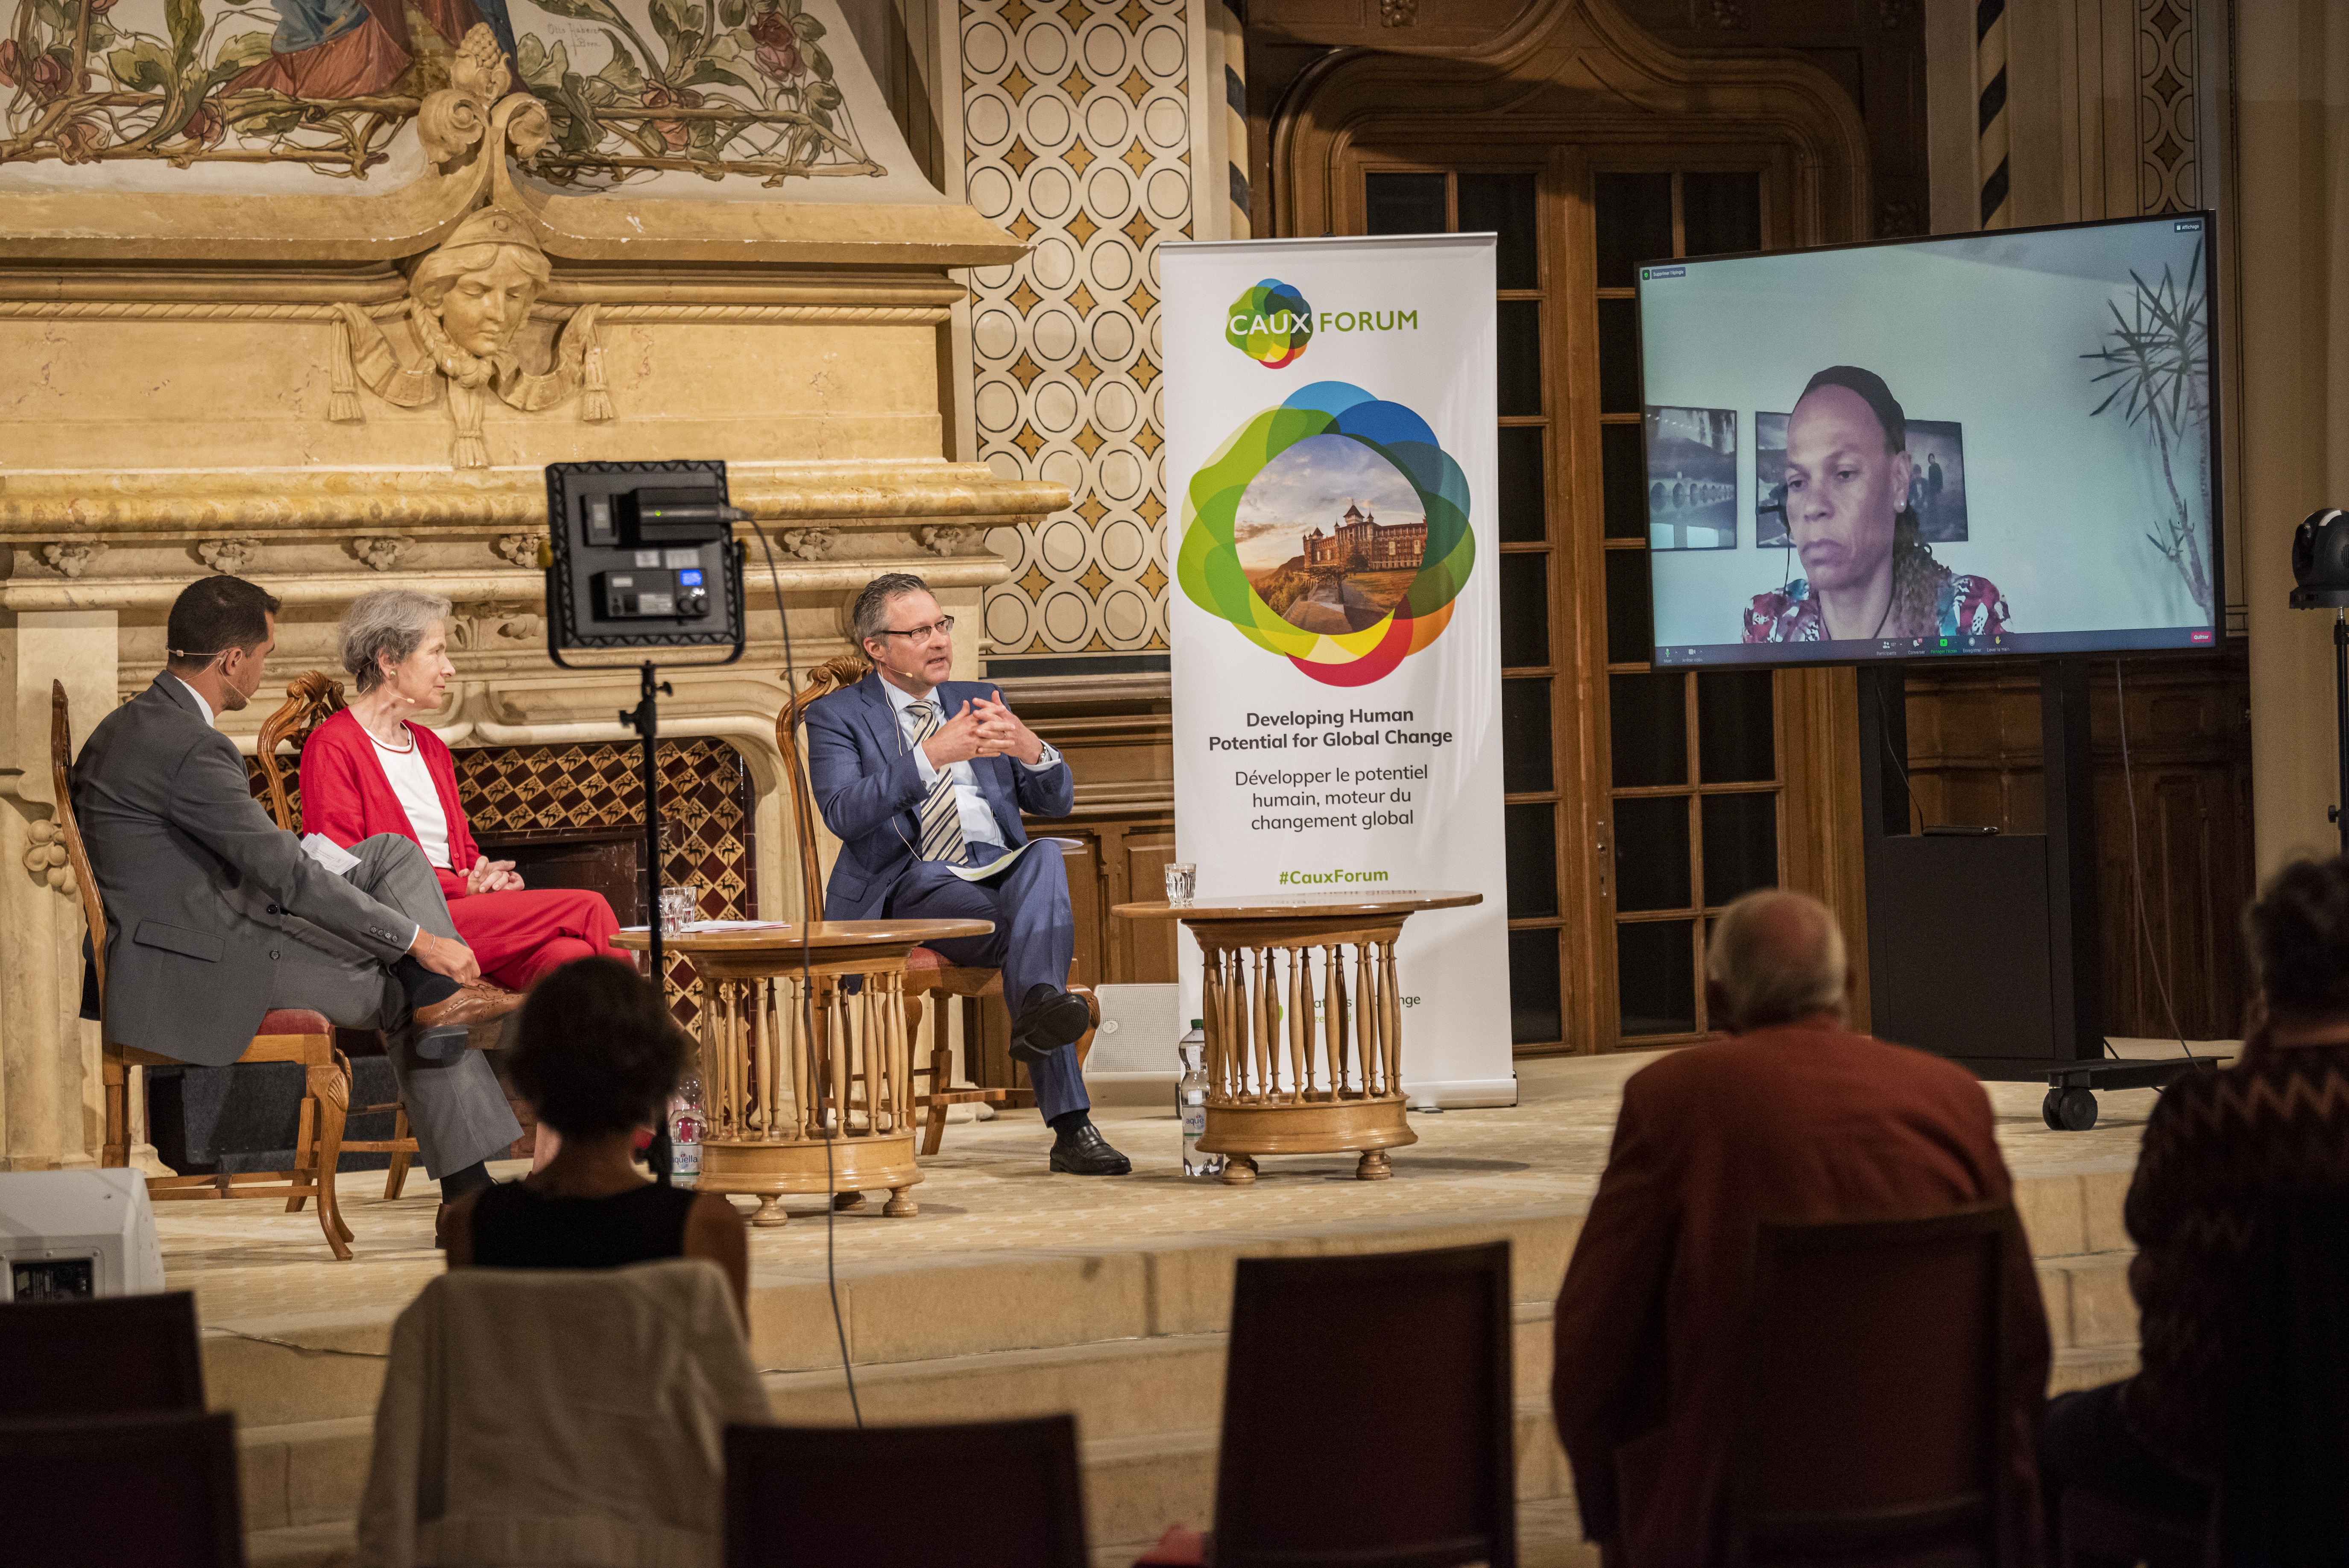 All speakers on stage Opening Ceremony Caux Forum 2021